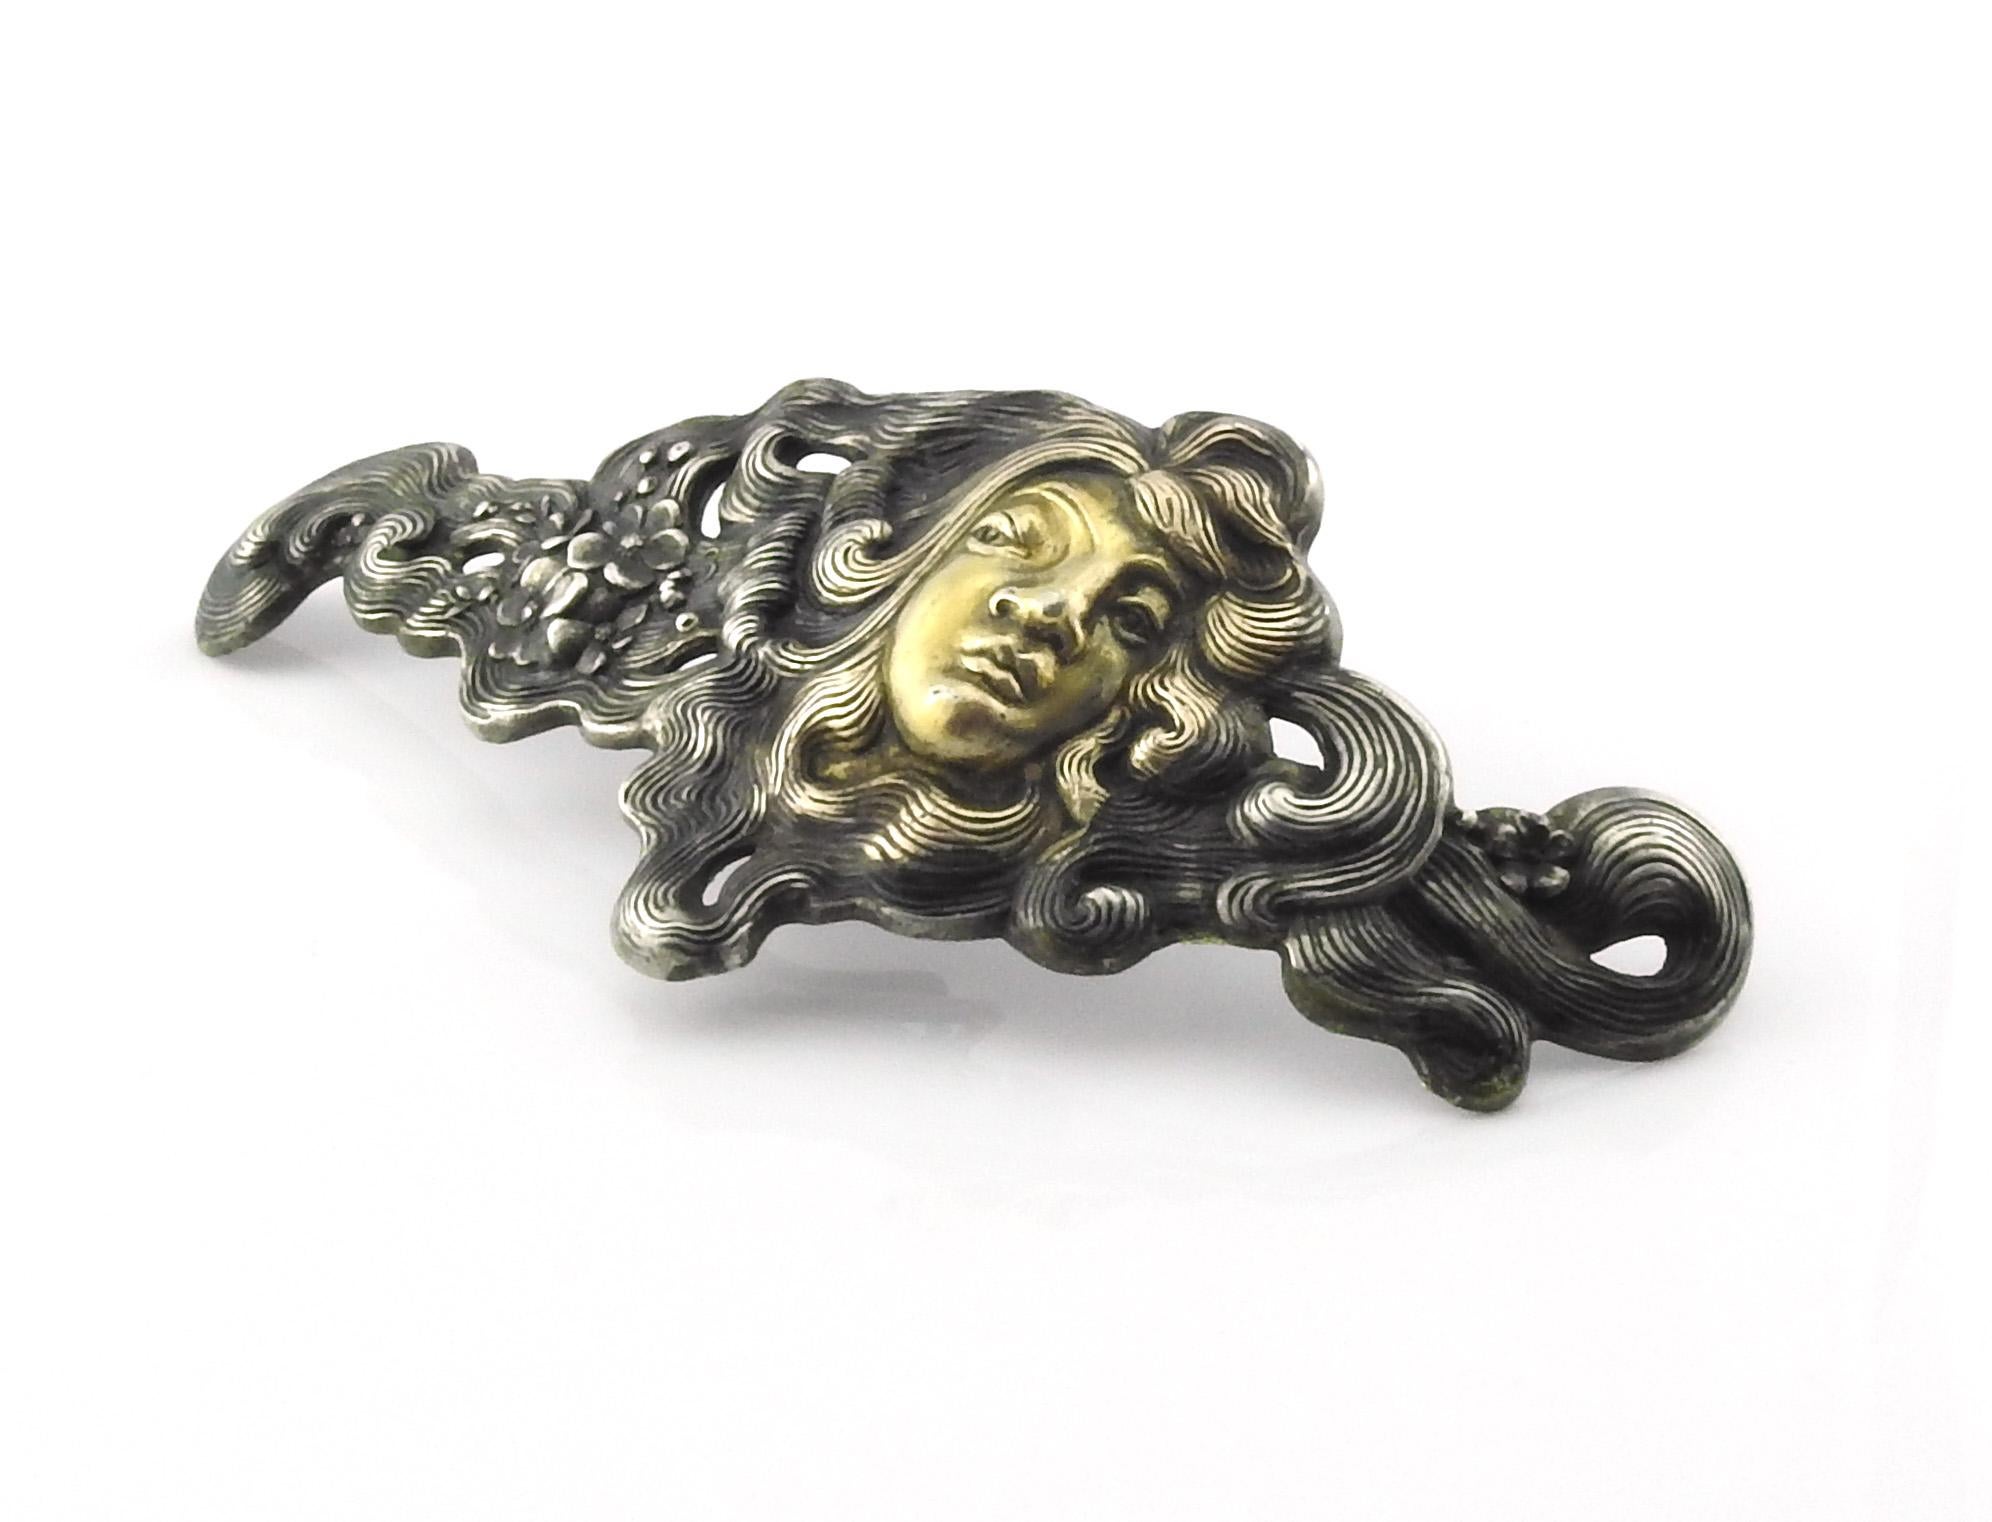 Antique George W. Shiebler sterling silver and 14K gold belt buckle.

George W. Shiebler & Co pf NY, NY sterling silver pierced and chased buckle featuring a woman's face in gold relief with flowers in her flowing hair. Circa 1890

Measures 5